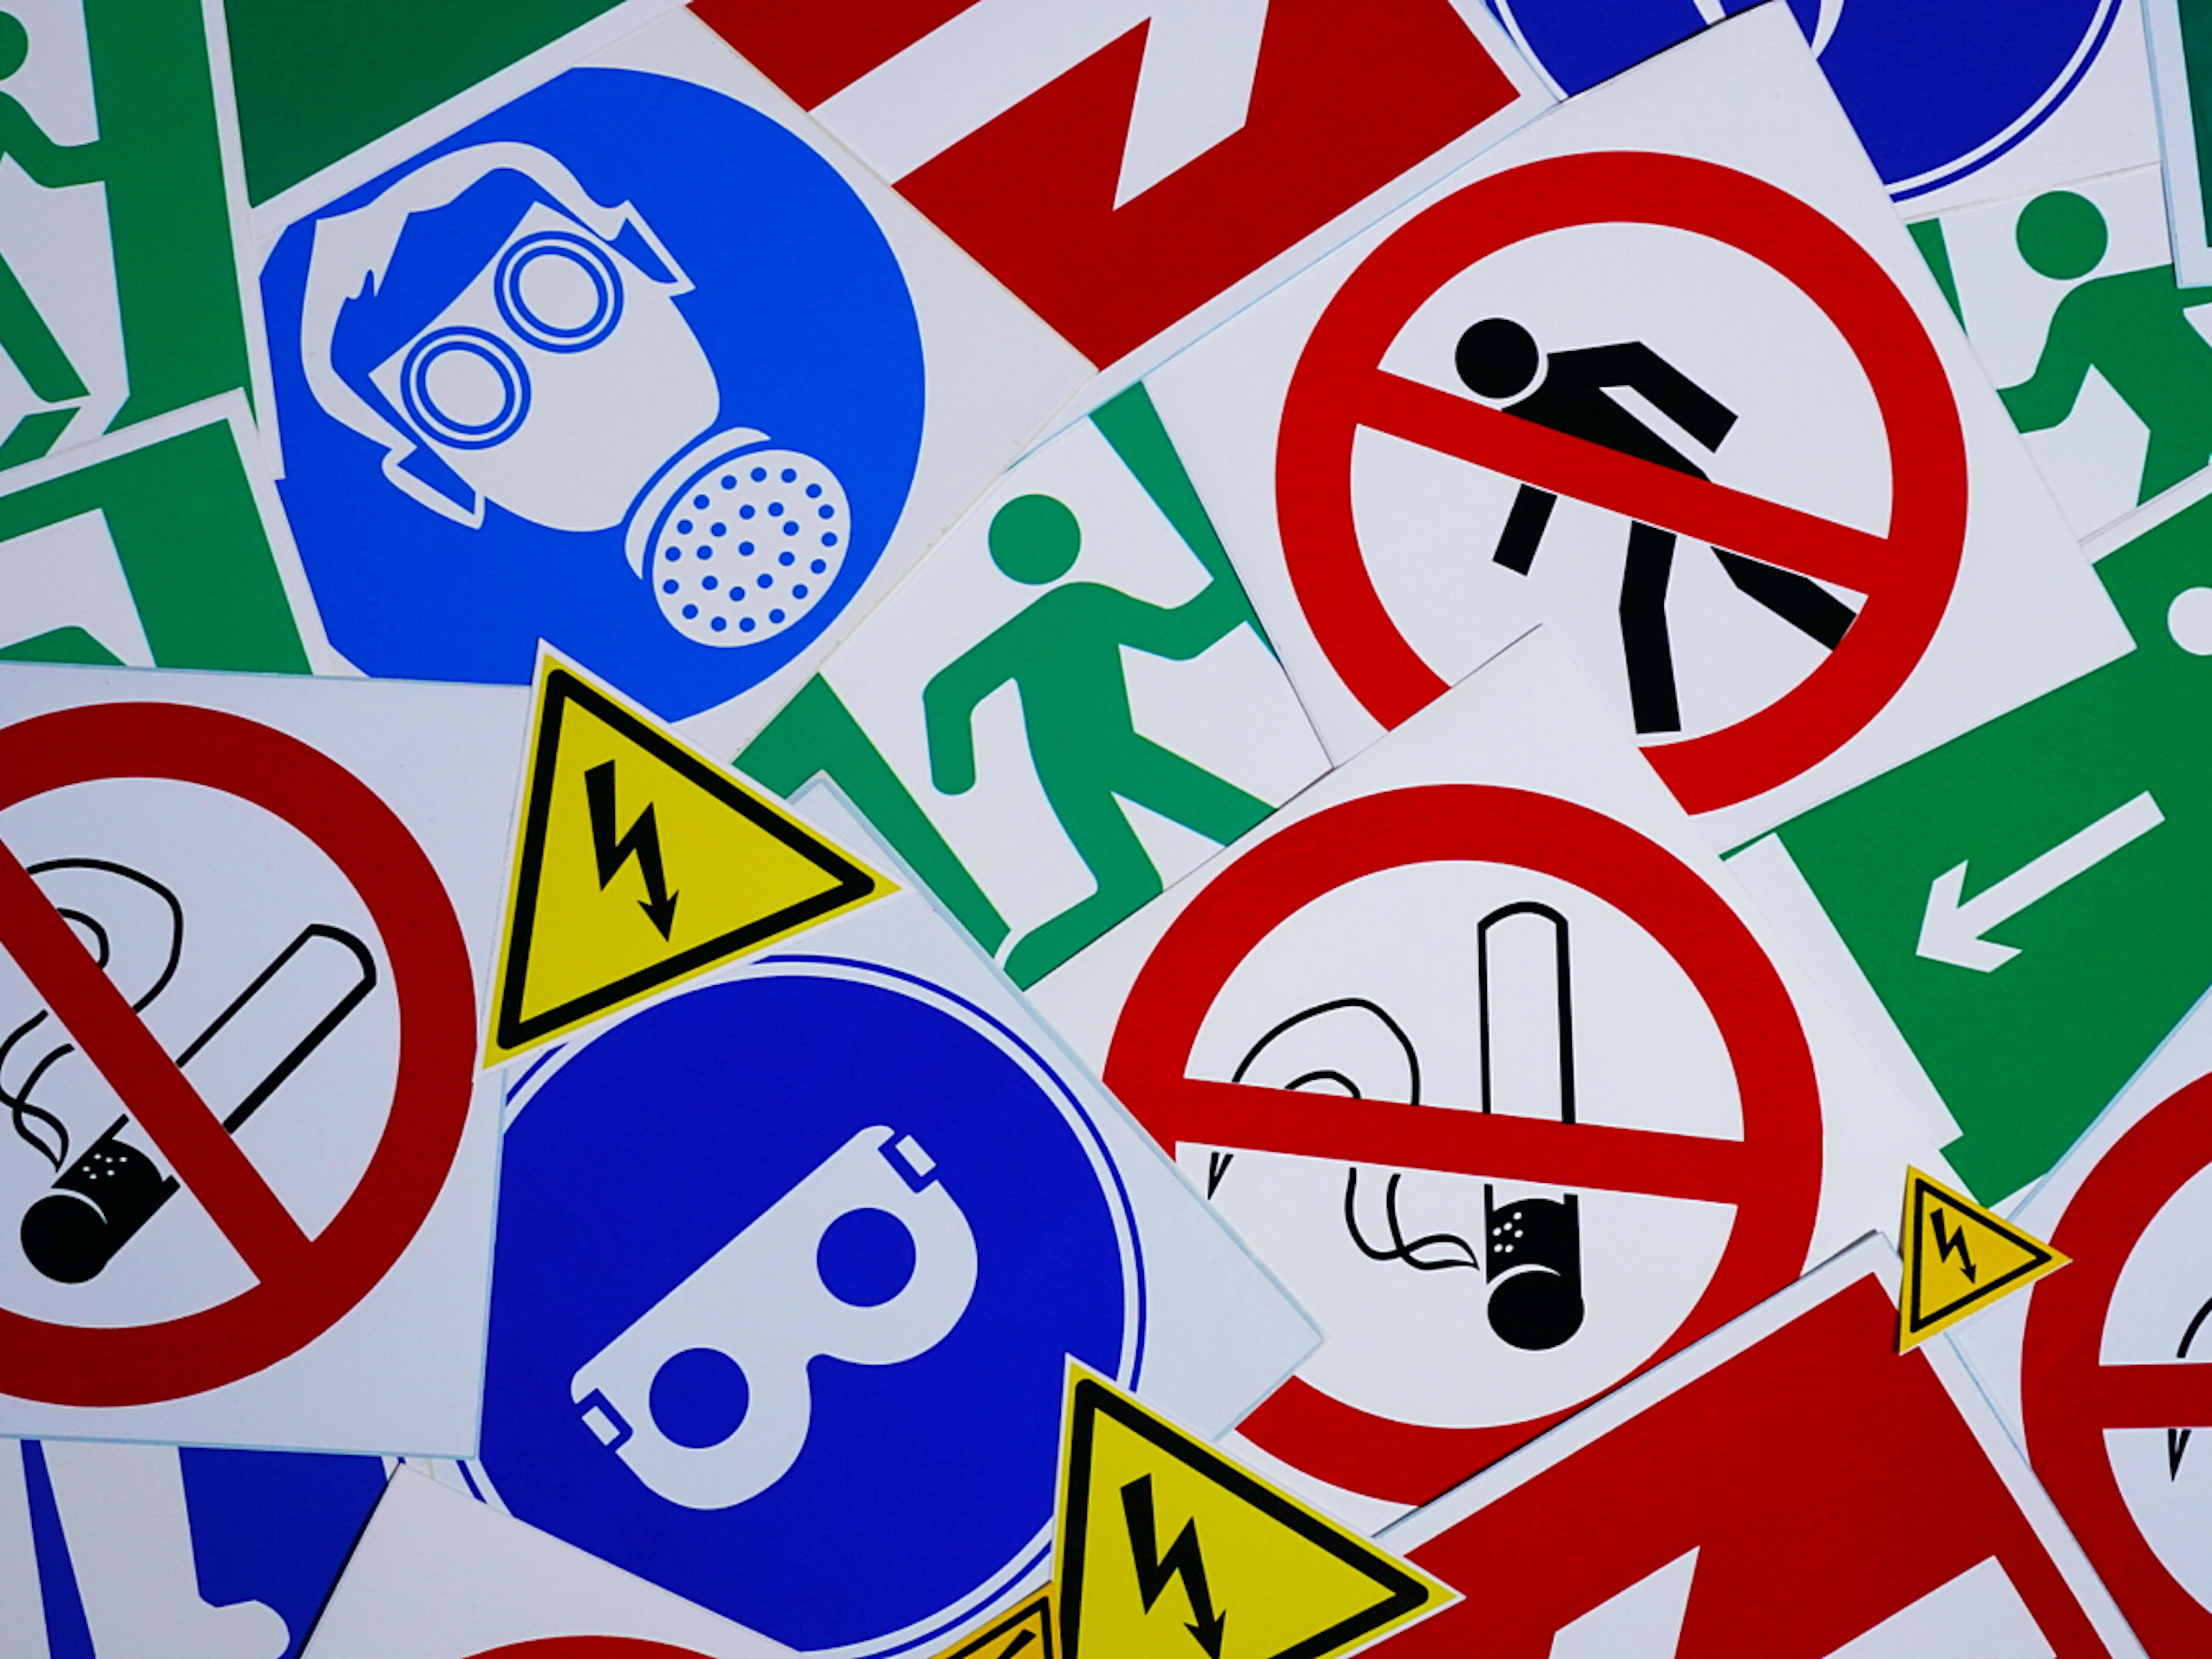 Decoding Safety Signs: Understanding the Symbols and Meanings